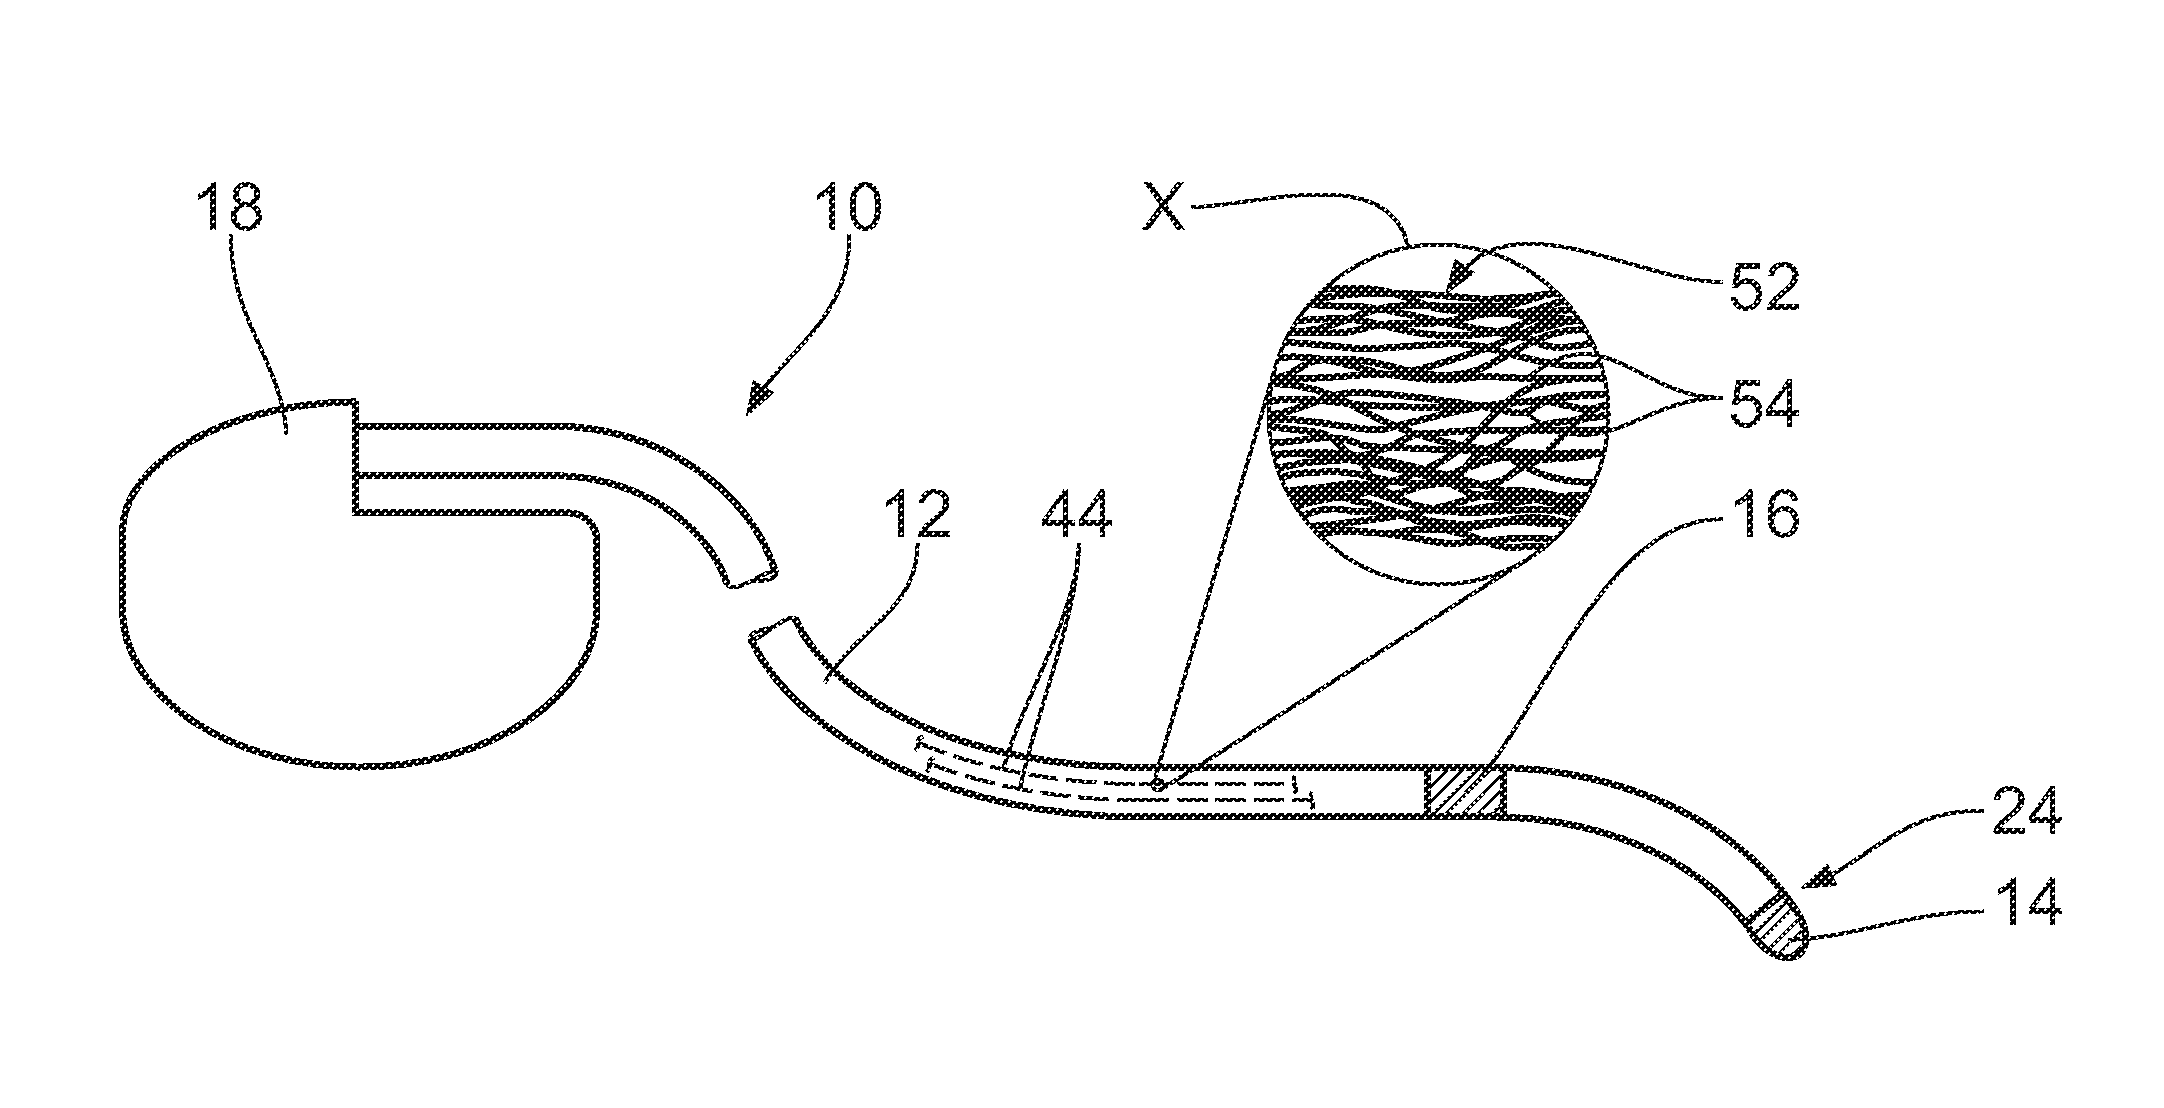 Electrode device for electrodiagnosis and/or electrotherapy